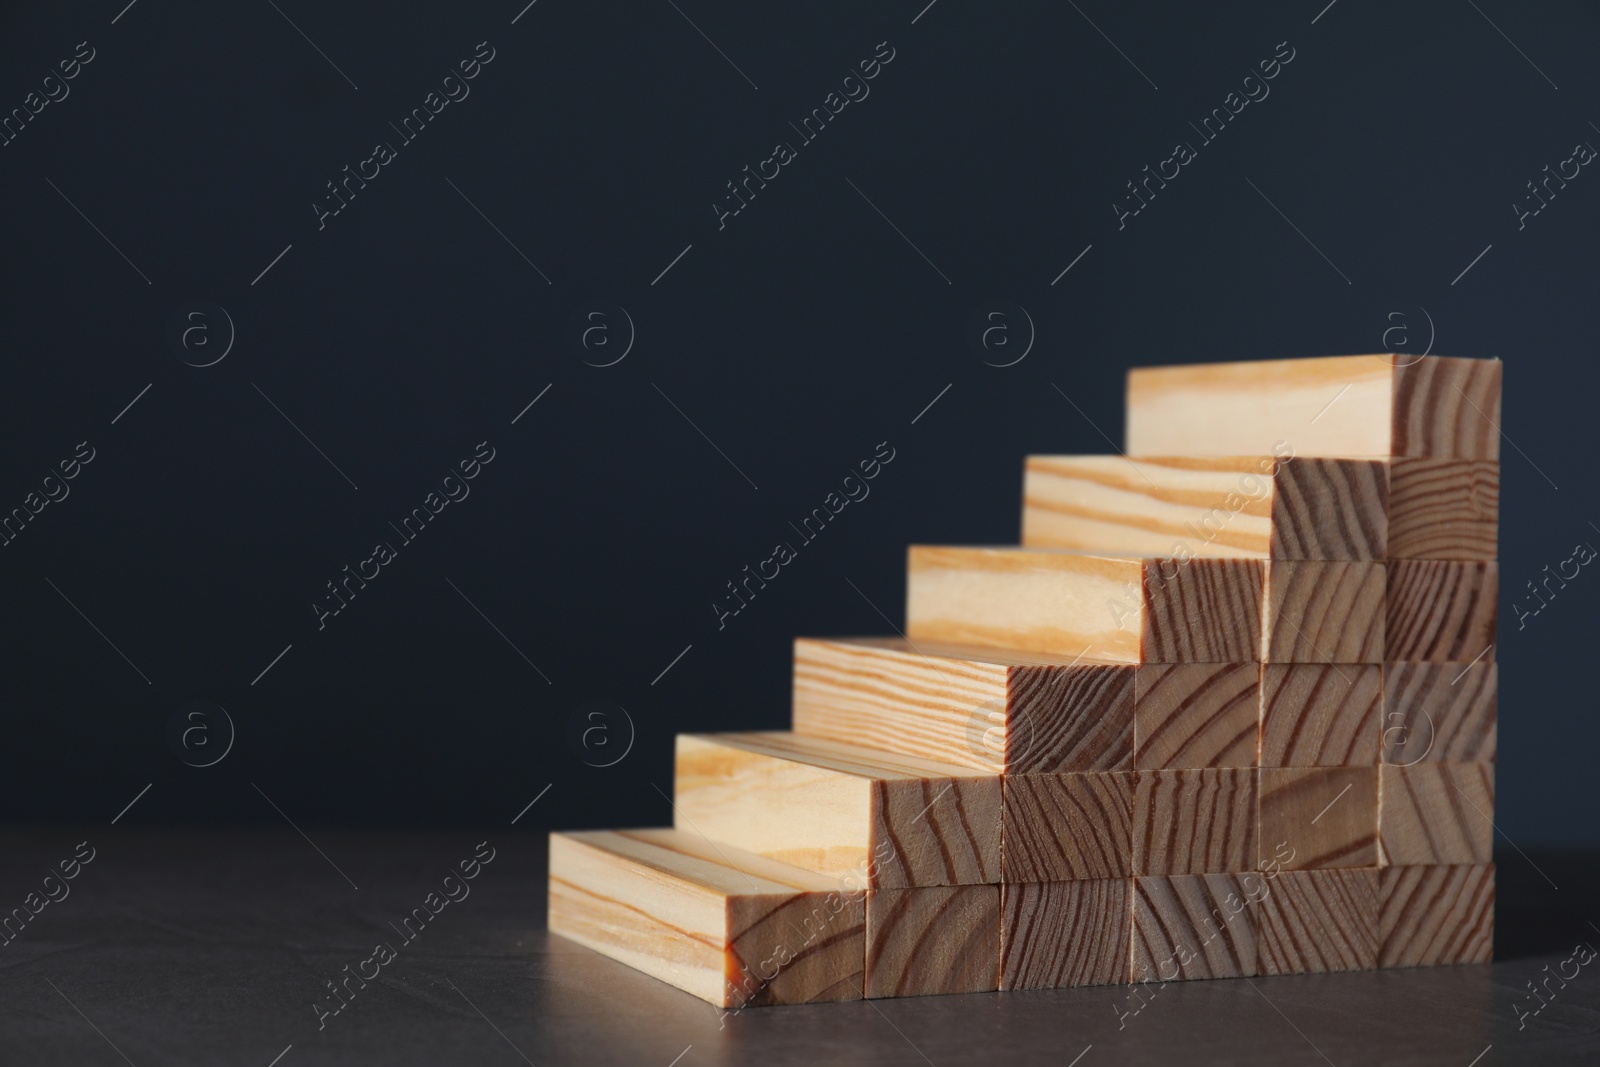 Photo of Steps made with wooden blocks on dark background, space for text. Career ladder